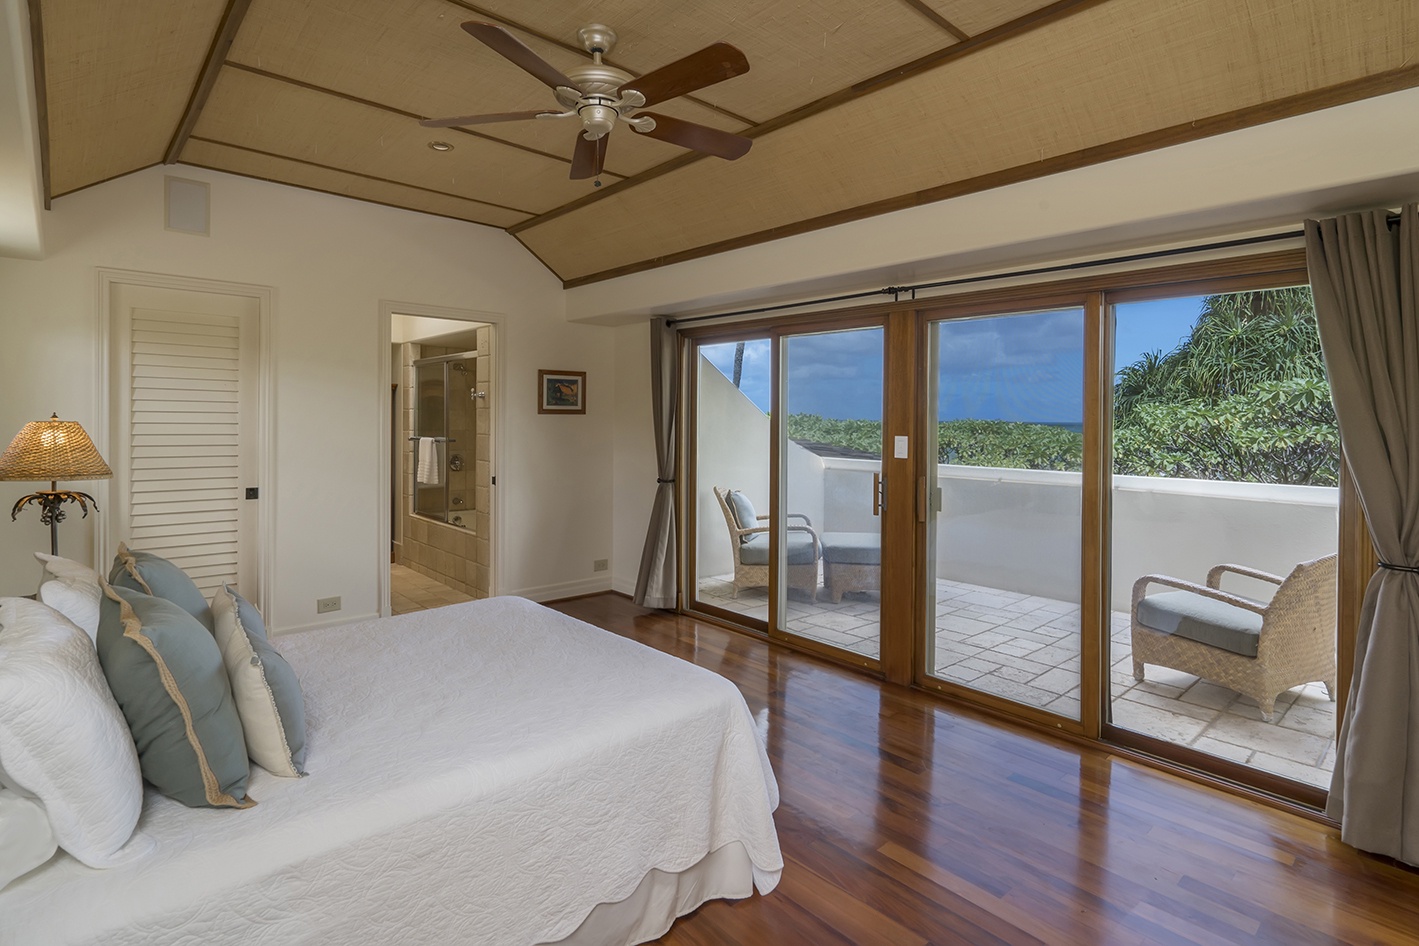 Kailua Vacation Rentals, Kailua's Kai Moena - Guest house: Guest Bedroom 3 with split A/C located upstairs.  Spiral staircase is very tight. Queen Bed.